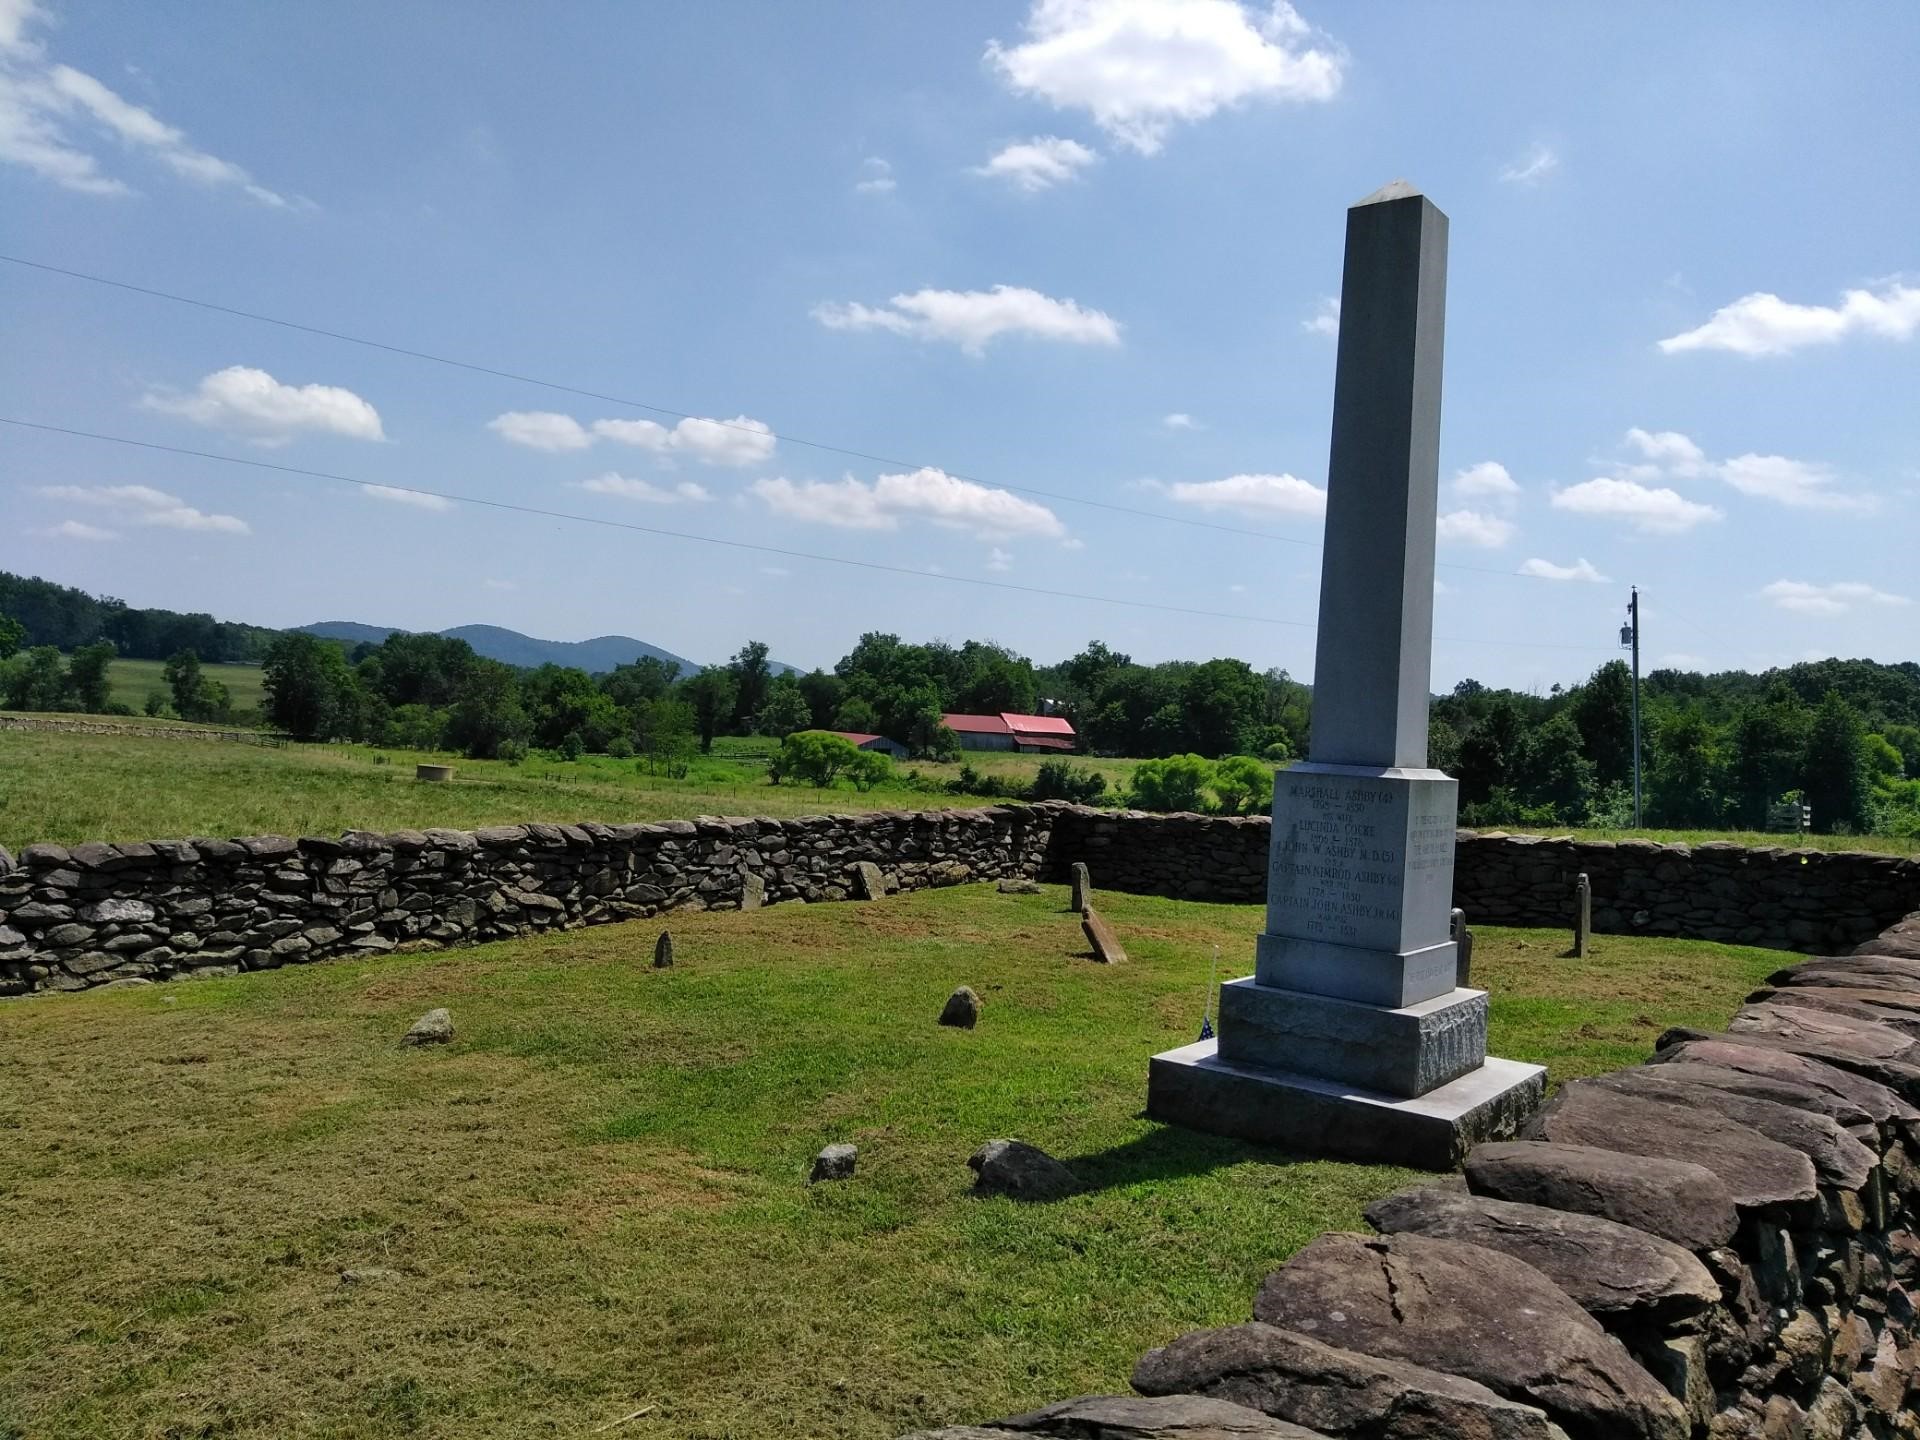 The Ashby Family Cemetery near Delaplane, Virginia. Final resting place of Captain John Ashby, as well as much of the rest of his family. The cemetery is on private property but can be s